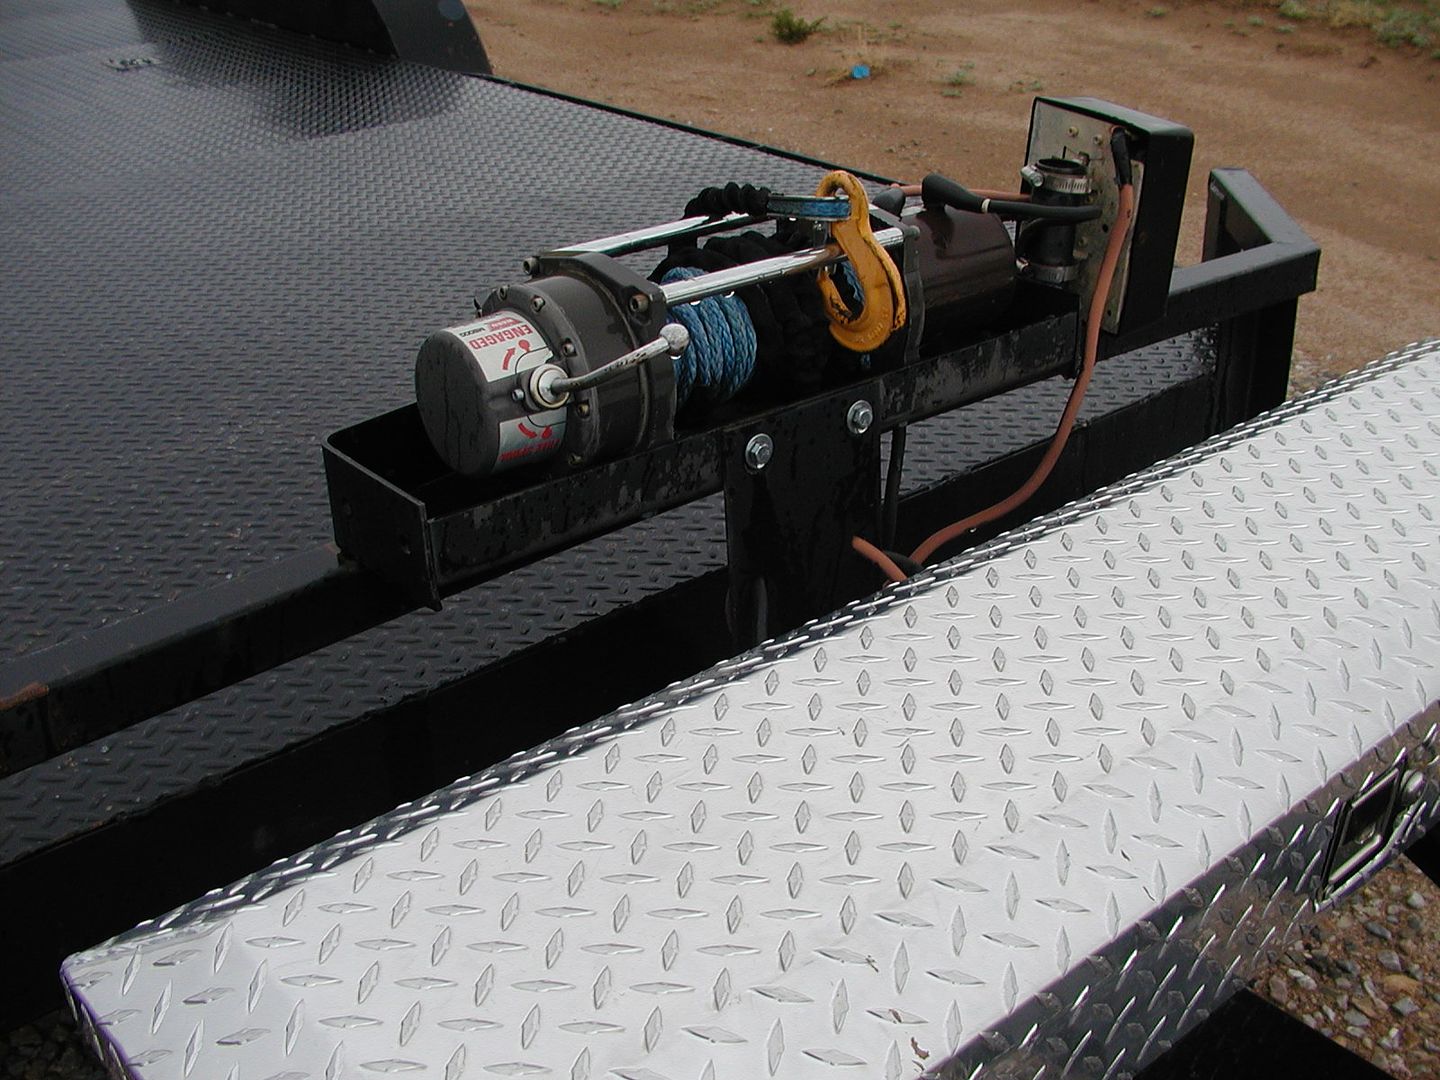 OPEN Trailer electric WINCH mounting options? - Chevelle Tech